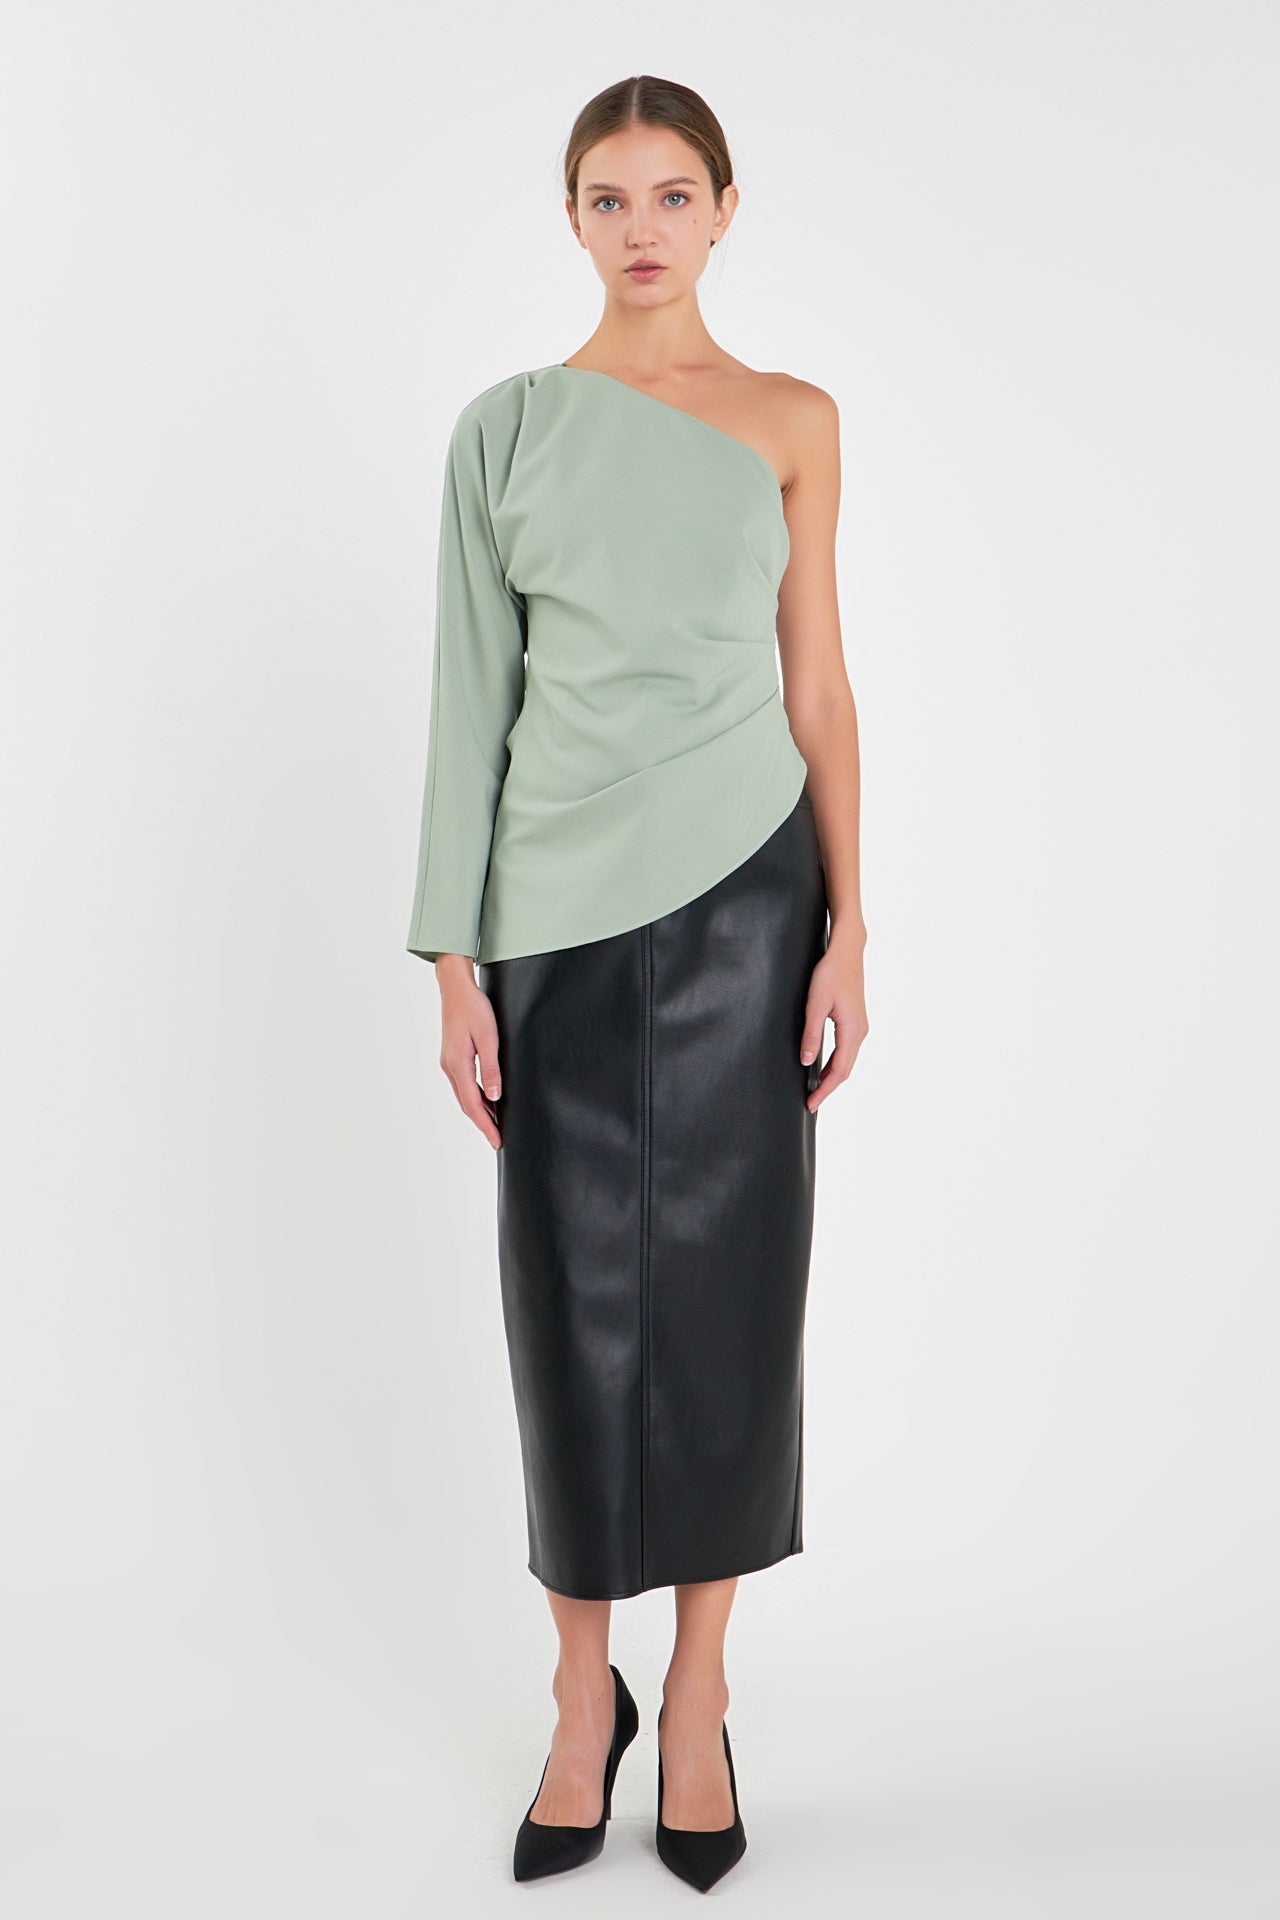 GREY LAB - Asymmetric Ruched Top - TOPS available at Objectrare